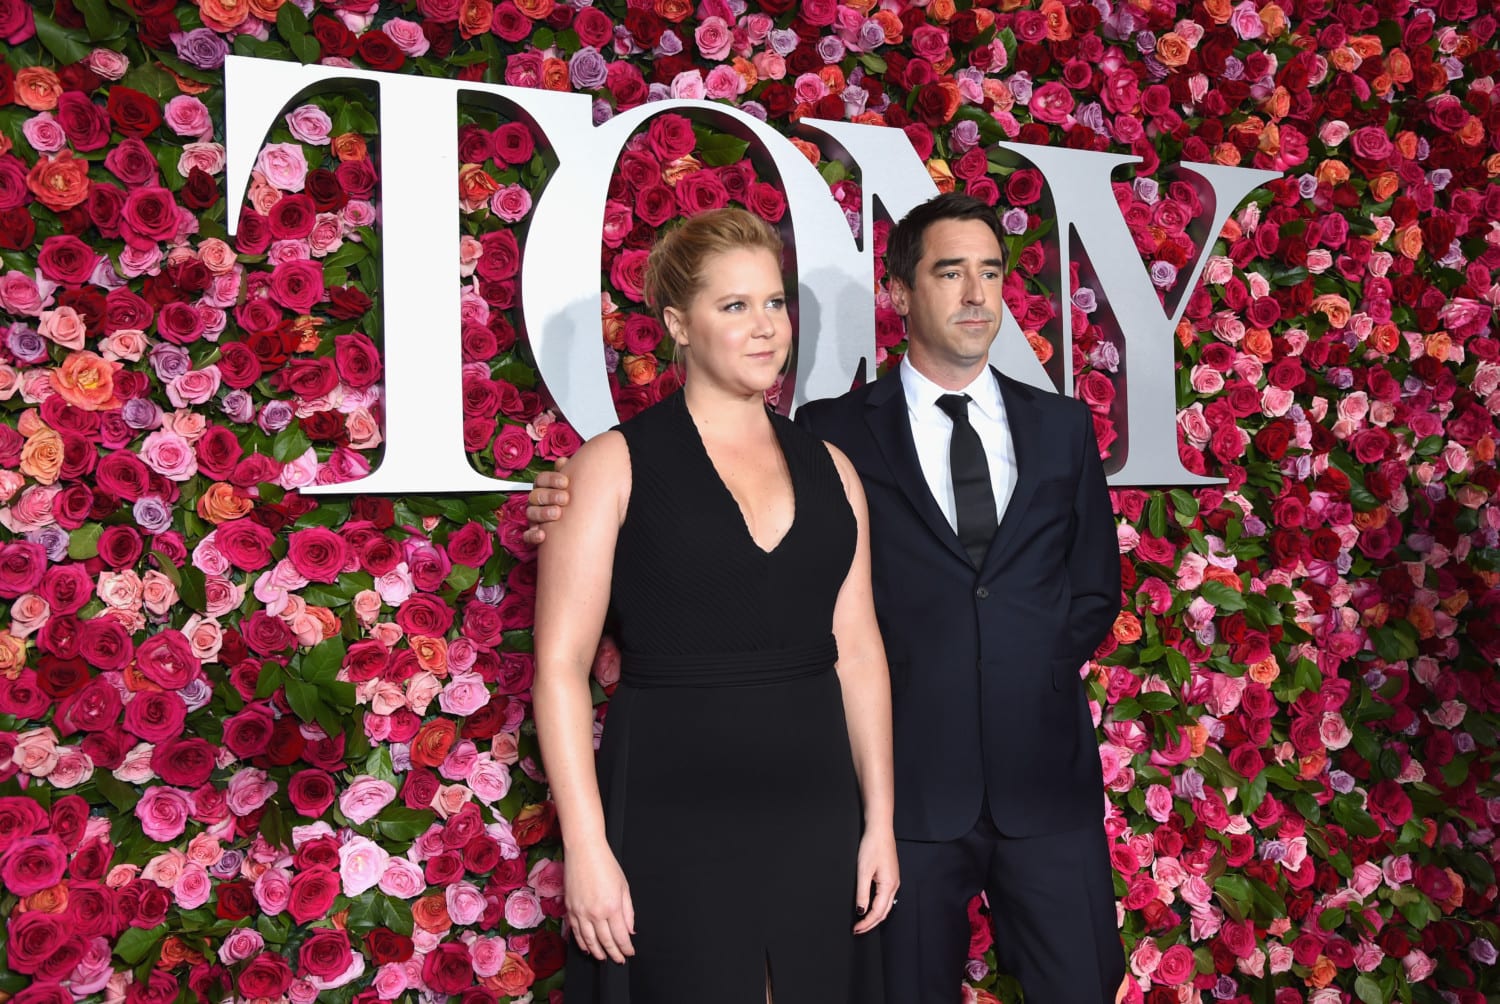 Amy Schumer and Chris fisher photo